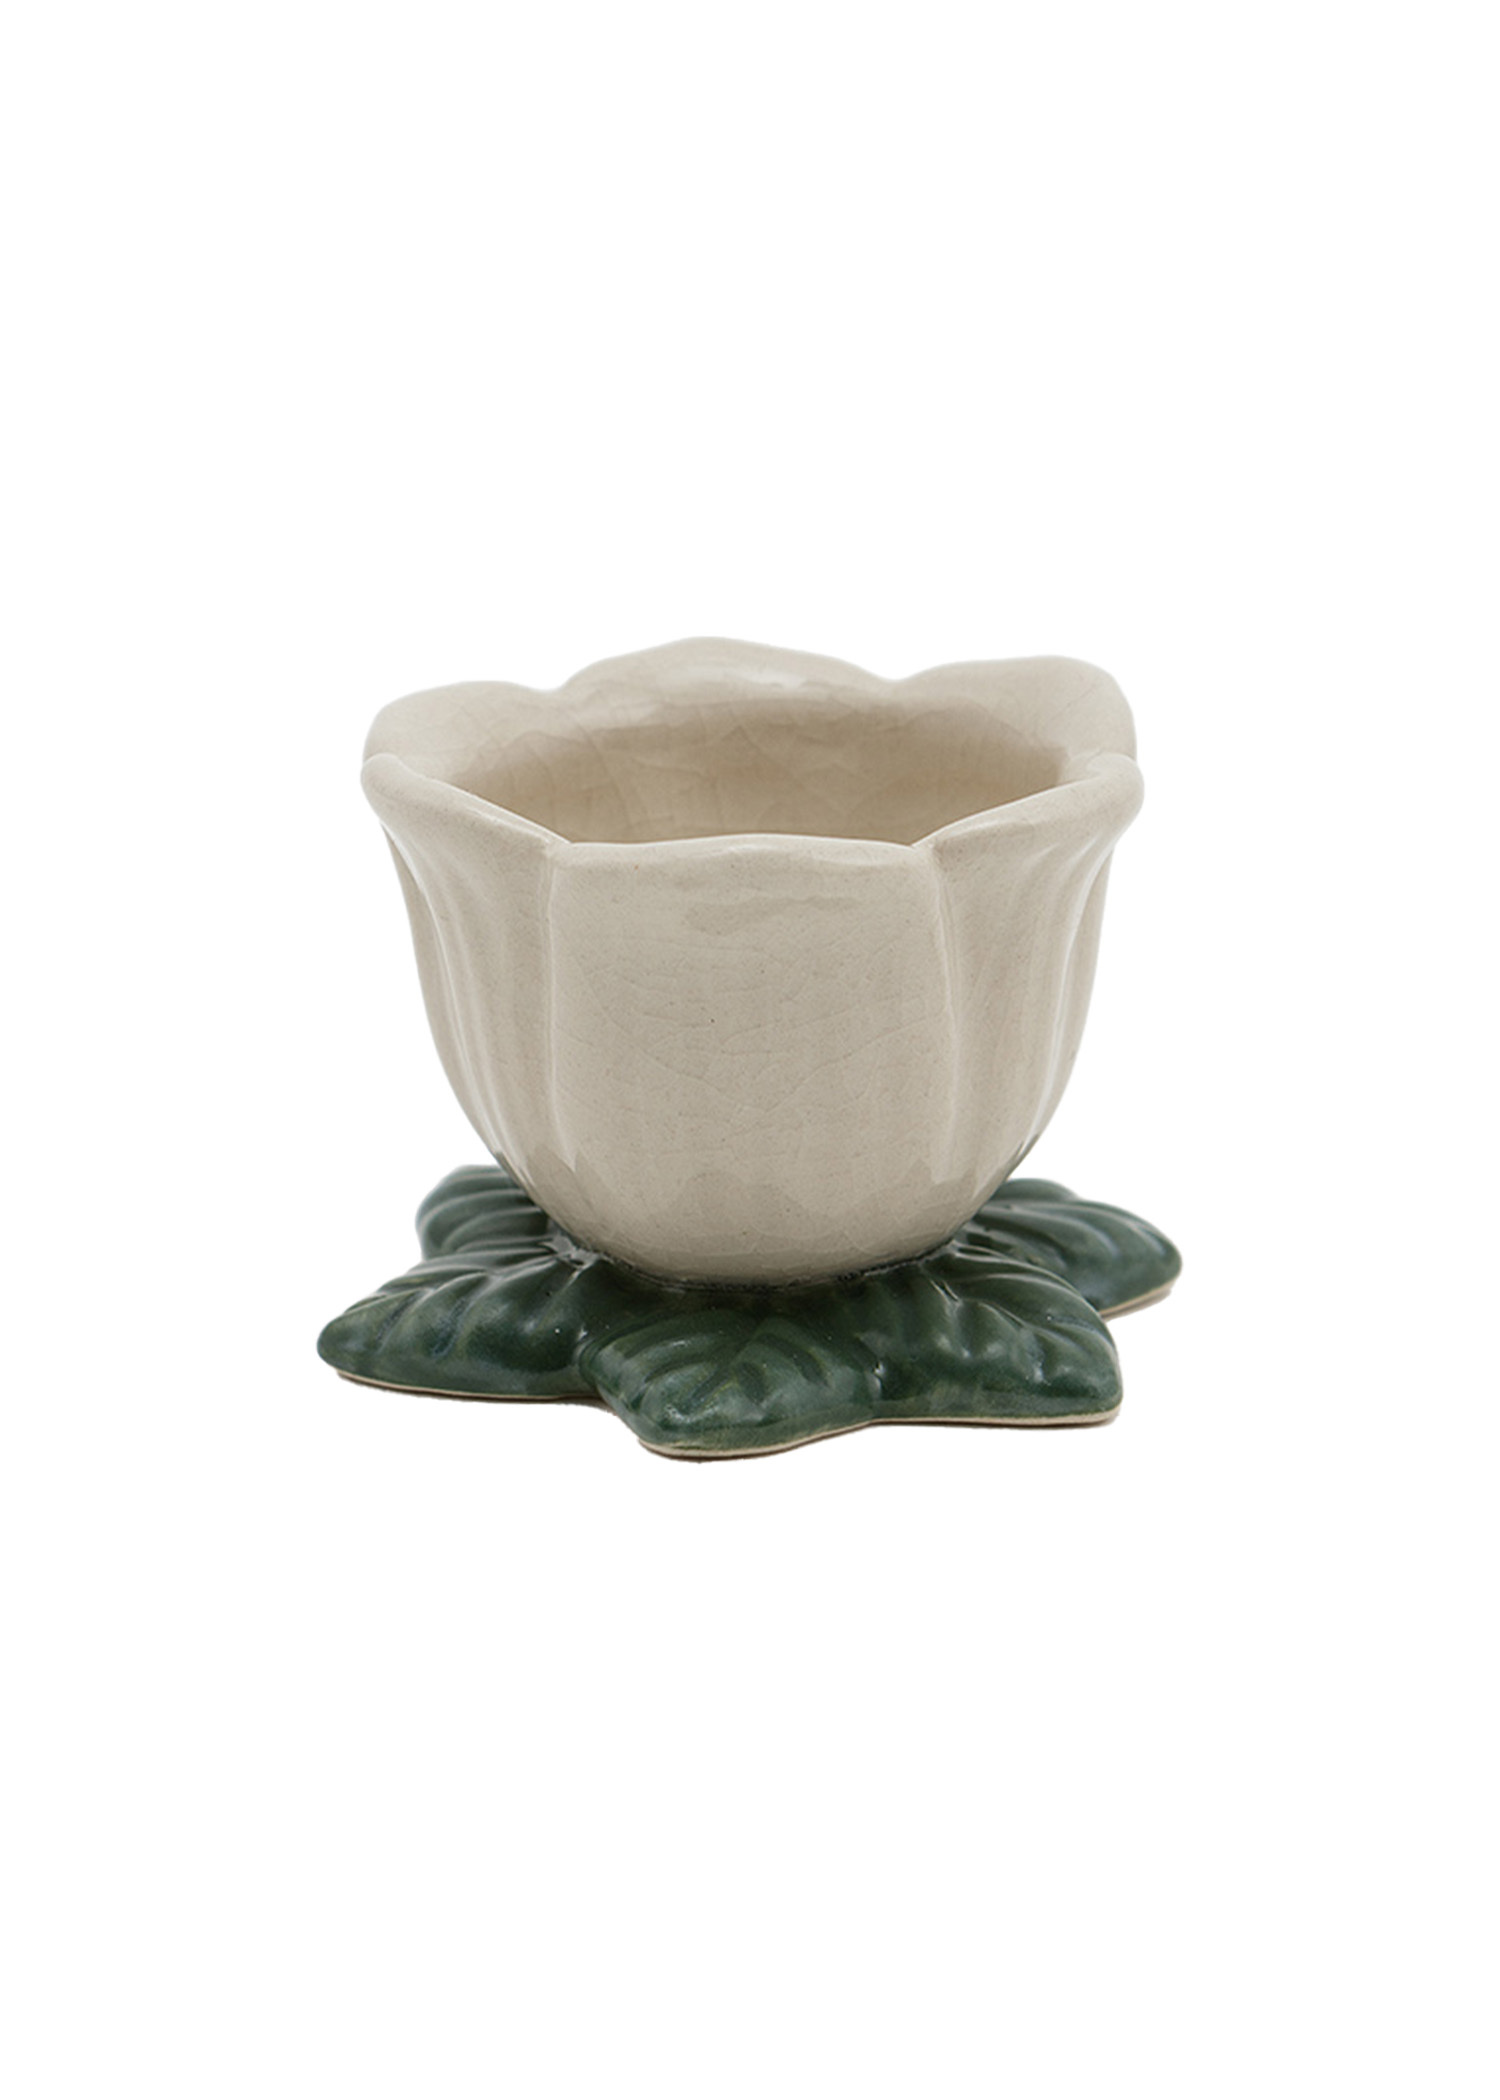 Tulip shaped egg cup Image 0